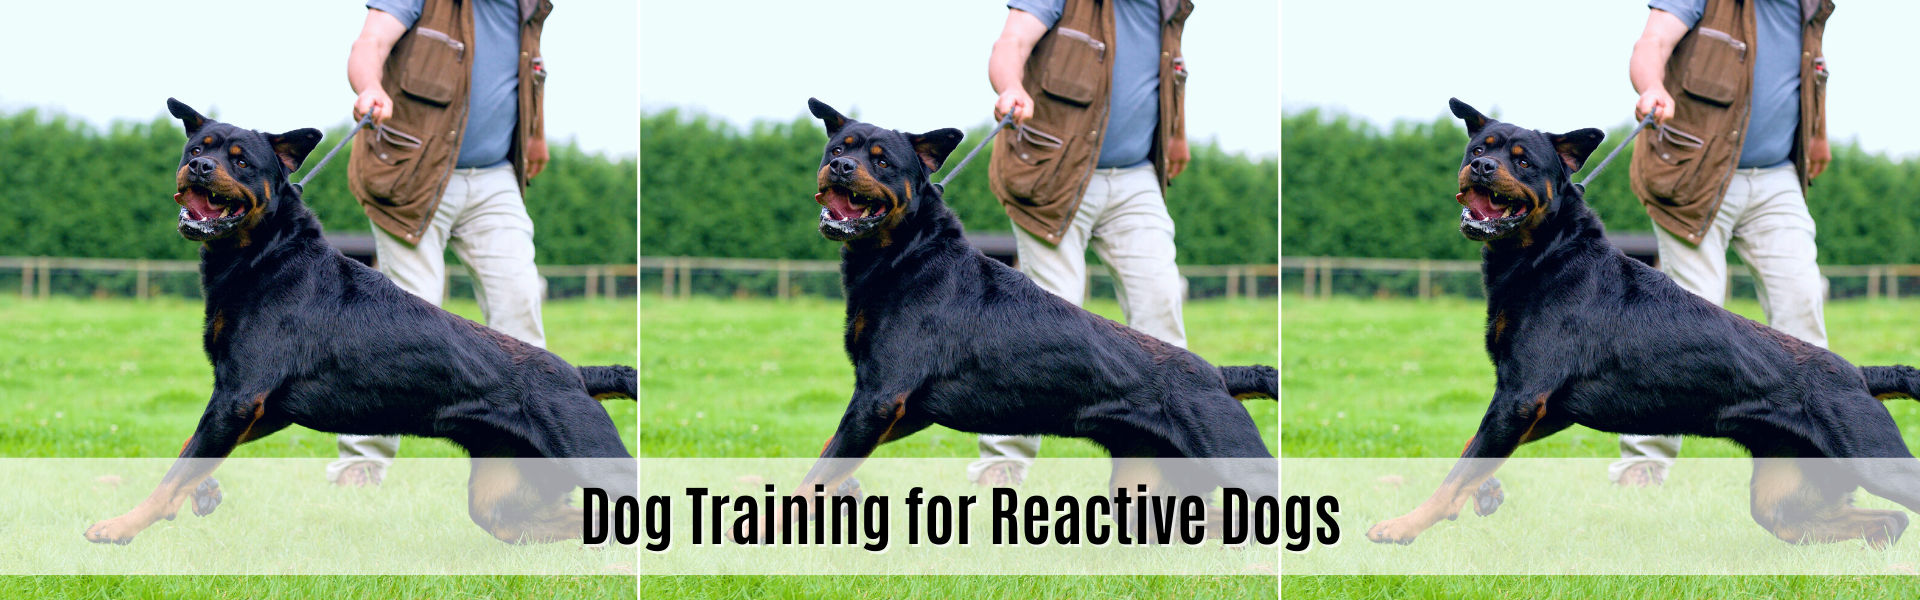 dog training for reactive dogs